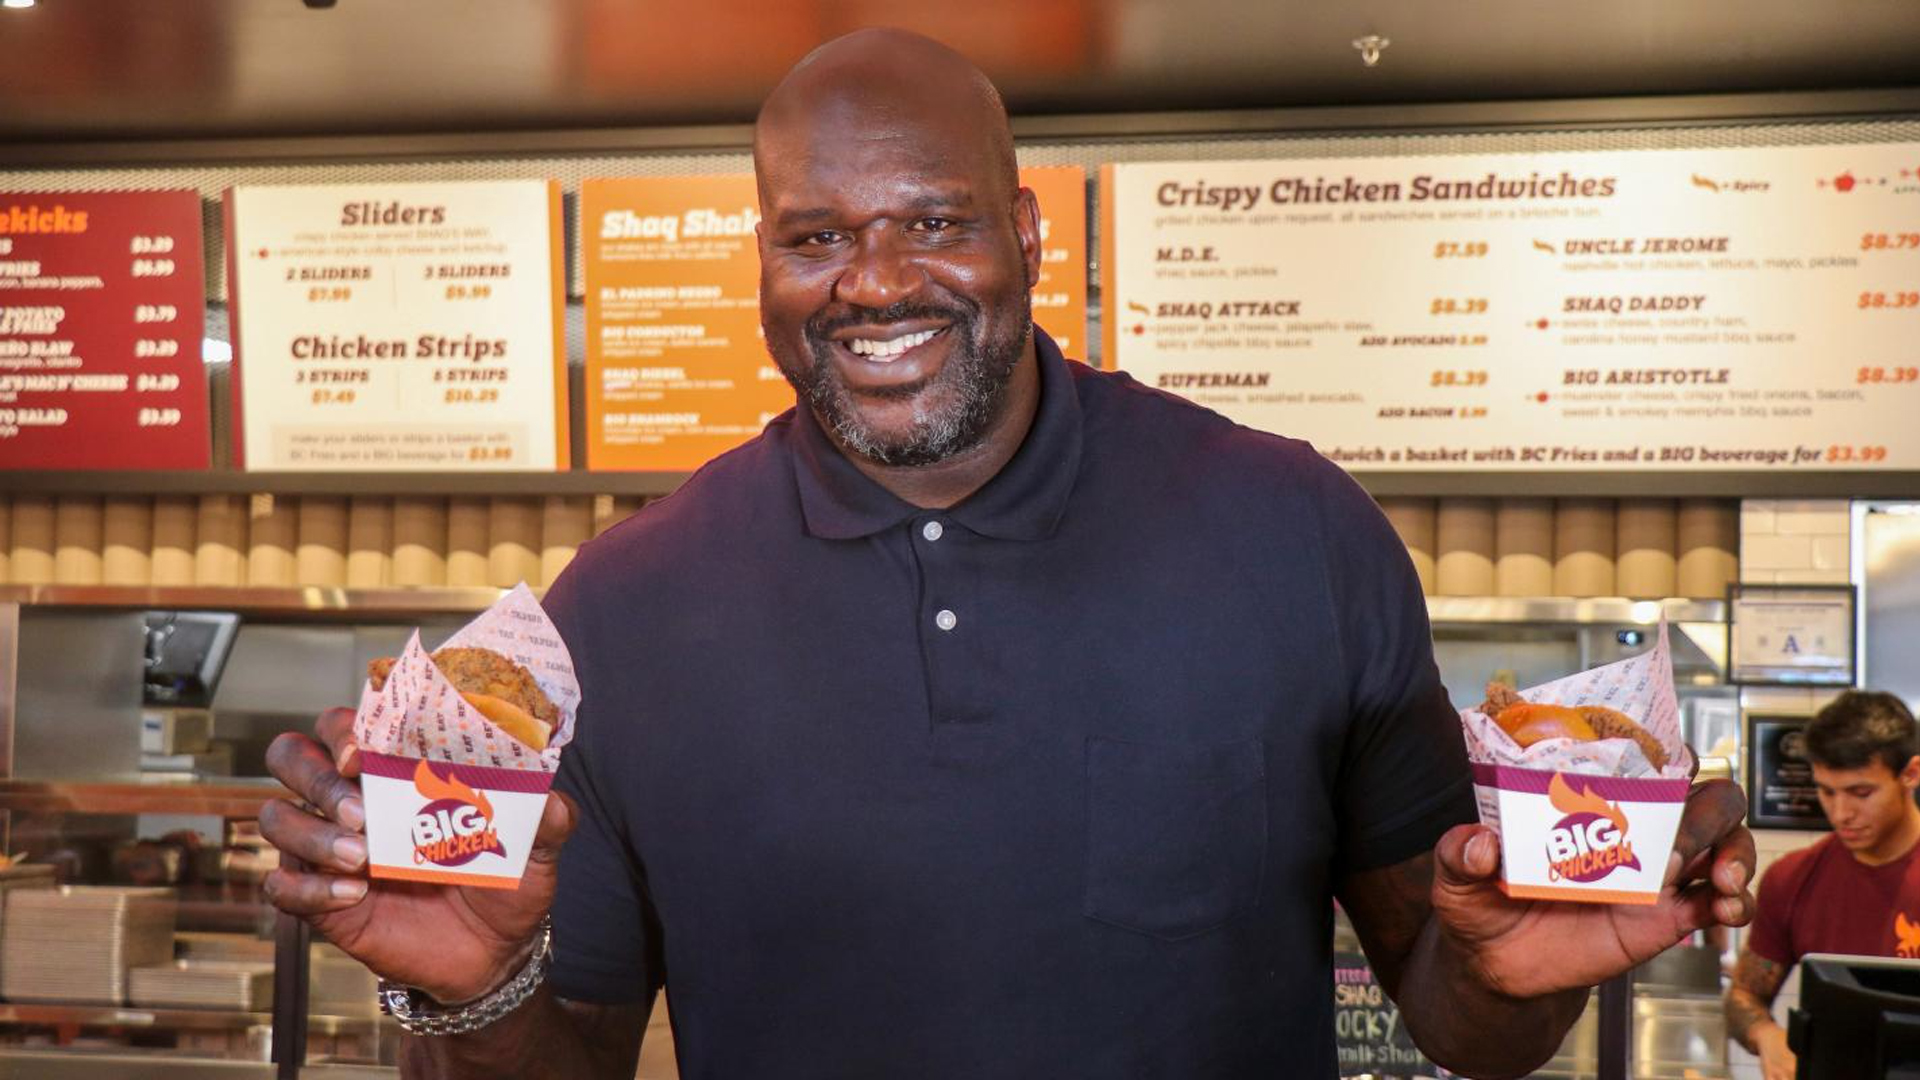 Shaq’s Food Empire Grows Even Bigger As His Big Chicken Franchise Heads To A $1.5B Sports Arena